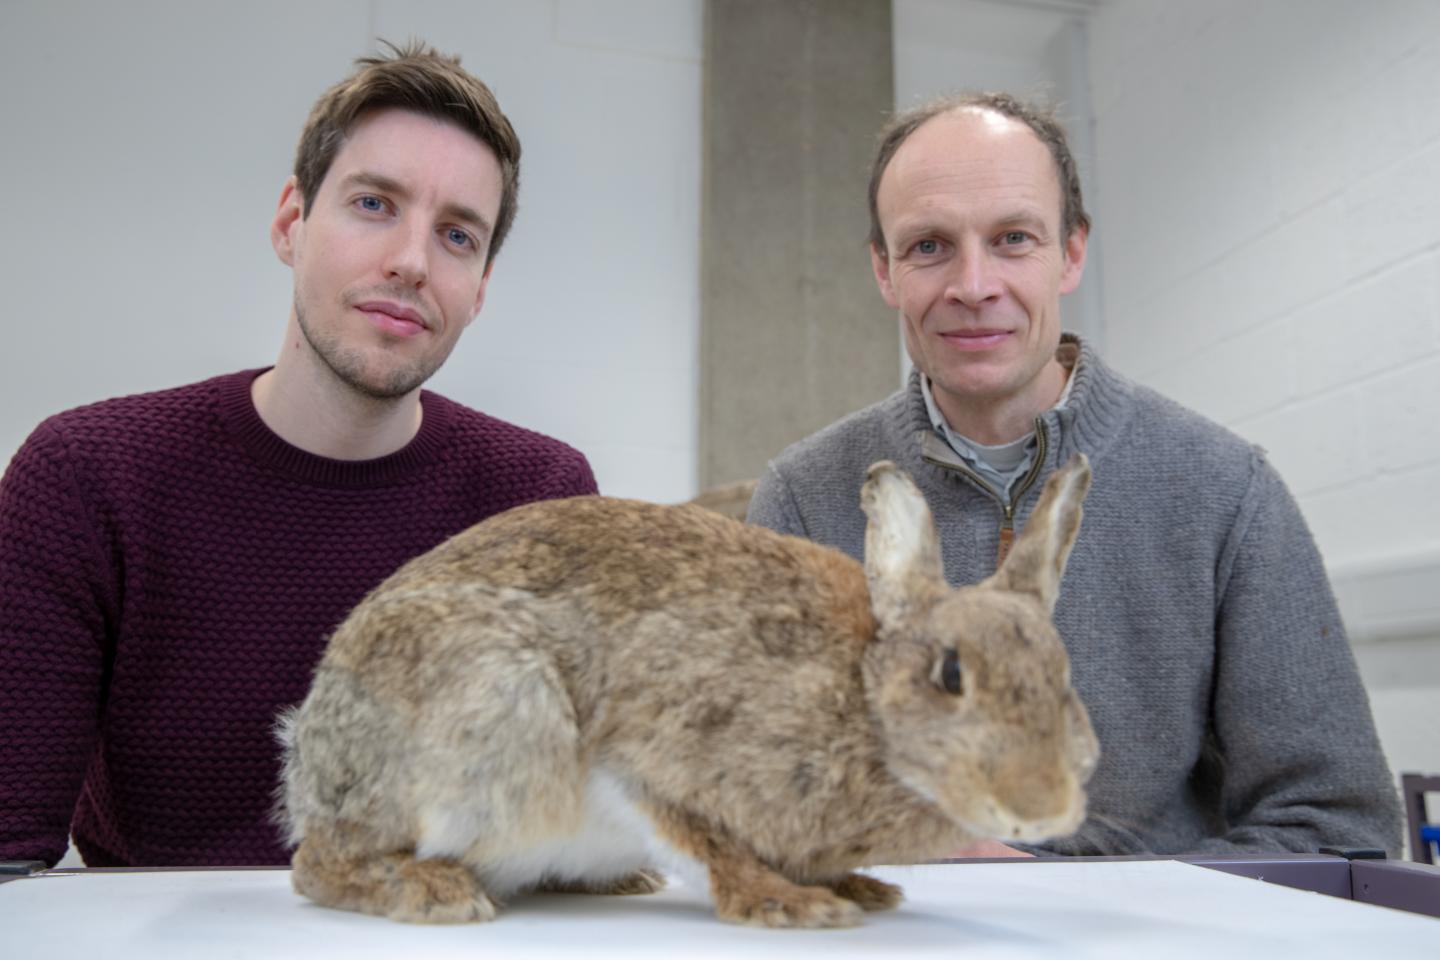 Joel Alves, Francis Jiggins and a Rabbit in the University Museum of Zoology, Cambridge, UK